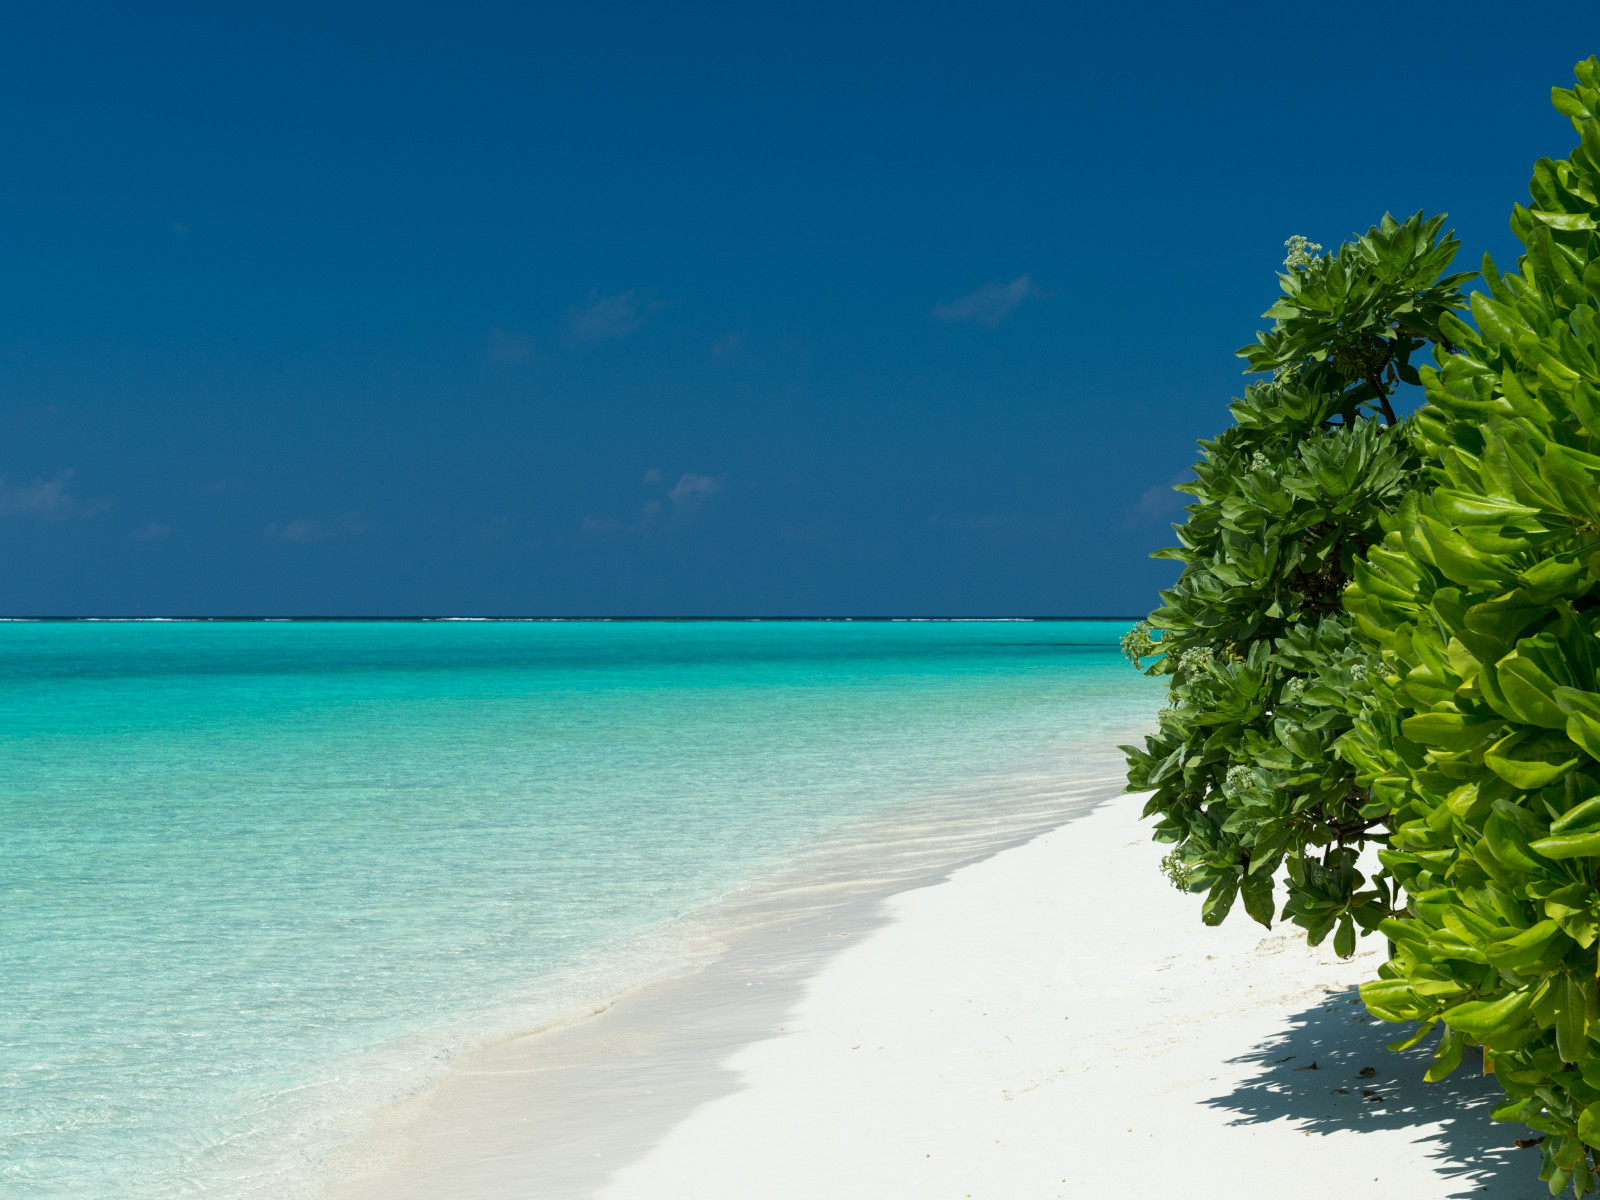 Turquoise waters of Maldives wallpaper 1600x1200